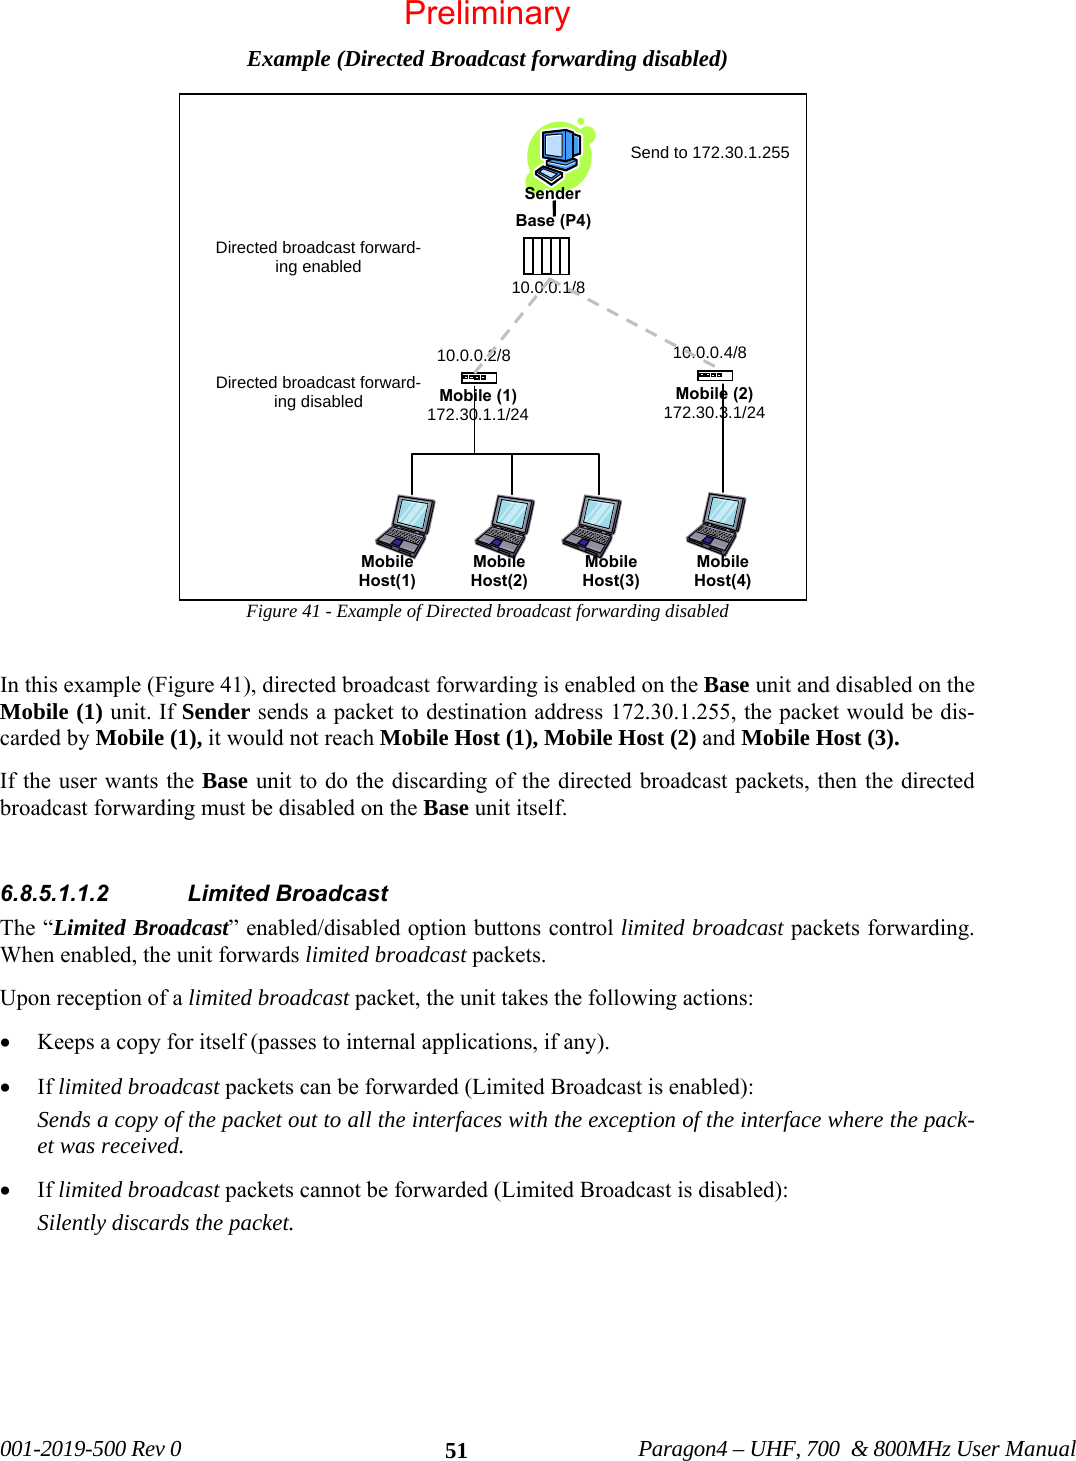   001-2019-500 Rev 0          Paragon4 – UHF, 700  &amp; 800MHz User Manual   51Example (Directed Broadcast forwarding disabled) Figure 41 - Example of Directed broadcast forwarding disabled  In this example (Figure 41), directed broadcast forwarding is enabled on the Base unit and disabled on the Mobile (1) unit. If Sender sends a packet to destination address 172.30.1.255, the packet would be dis-carded by Mobile (1), it would not reach Mobile Host (1), Mobile Host (2) and Mobile Host (3).  If the user wants the Base unit to do the discarding of the directed broadcast packets, then the directed broadcast forwarding must be disabled on the Base unit itself.   6.8.5.1.1.2  Limited Broadcast  The “Limited Broadcast” enabled/disabled option buttons control limited broadcast packets forwarding. When enabled, the unit forwards limited broadcast packets.  Upon reception of a limited broadcast packet, the unit takes the following actions: • Keeps a copy for itself (passes to internal applications, if any). • If limited broadcast packets can be forwarded (Limited Broadcast is enabled):  Sends a copy of the packet out to all the interfaces with the exception of the interface where the pack-et was received. • If limited broadcast packets cannot be forwarded (Limited Broadcast is disabled): Silently discards the packet.    Sender Base (P4)Mobile (1) 172.30.1.1/24Mobile (2) 172.30.3.1/24 10.0.0.1/8 10.0.0.2/8  10.0.0.4/8 Directed broadcast forward-ing enabled Directed broadcast forward-ing disabled Send to 172.30.1.255 Mobile Host(2) Mobile Host(3) Mobile Host(1) Mobile Host(4) Preliminary